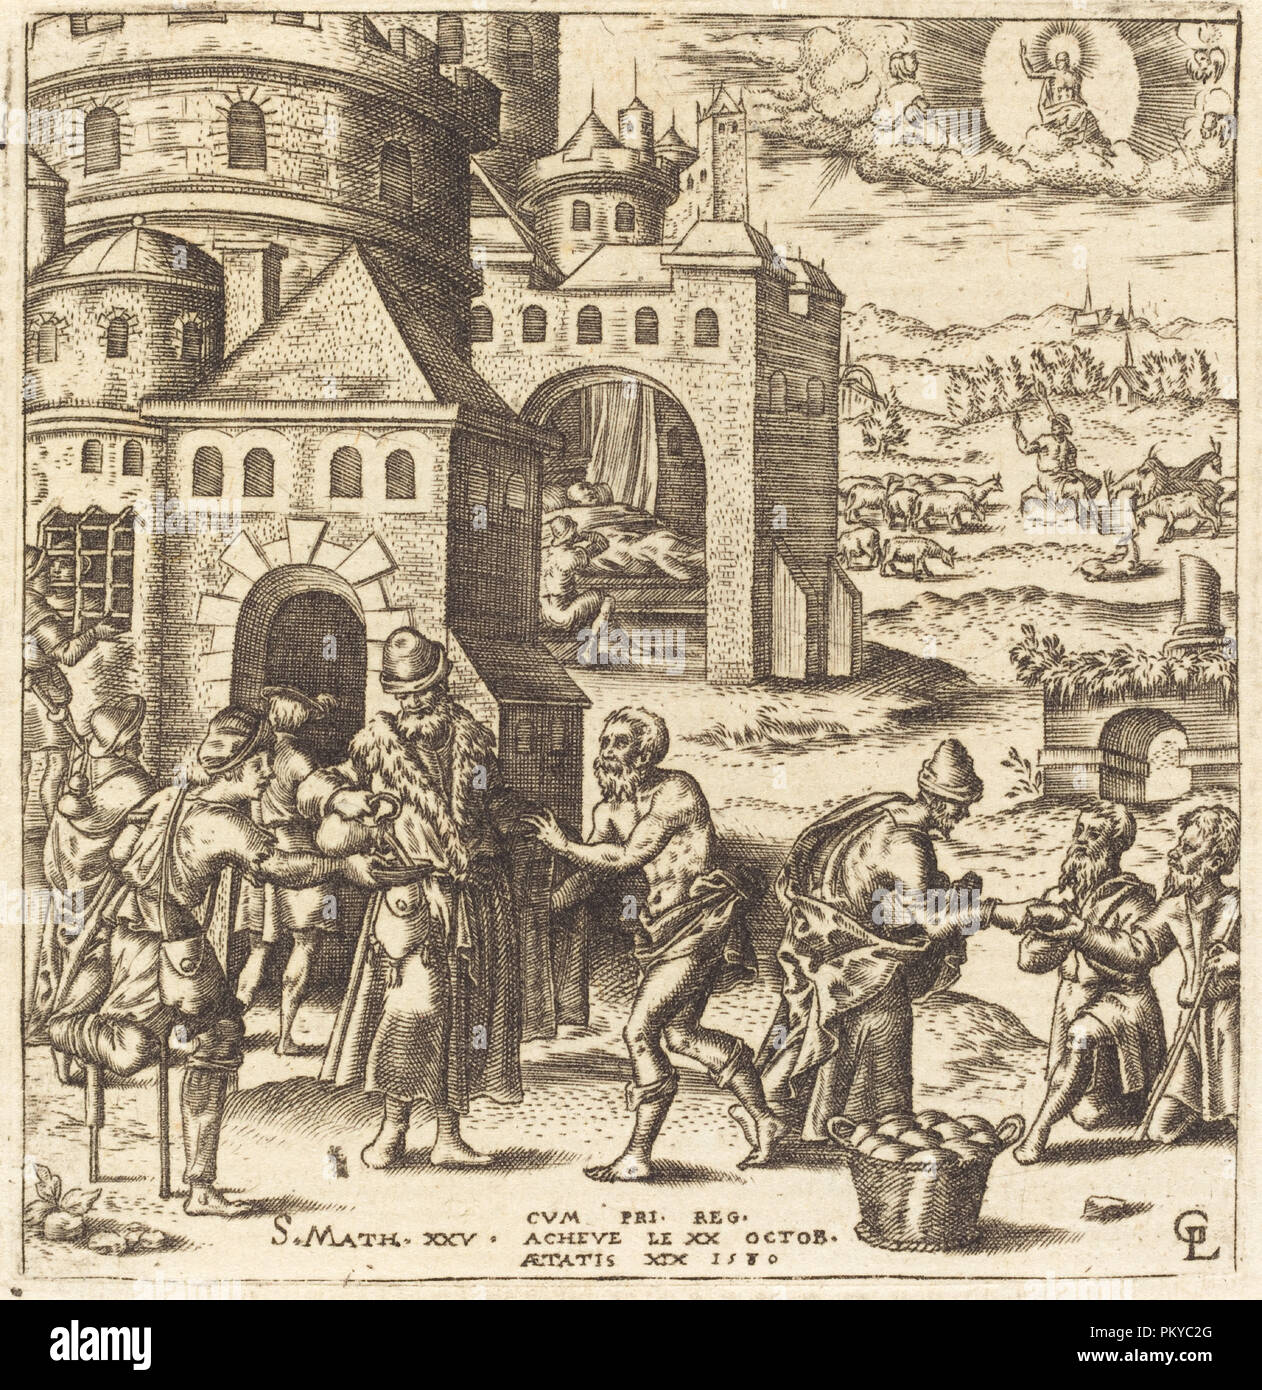 Teachings on the Coming of the Judgment. Dated: 1580. Medium: engraving. Museum: National Gallery of Art, Washington DC. Author: Léonard Gaultier. Stock Photo